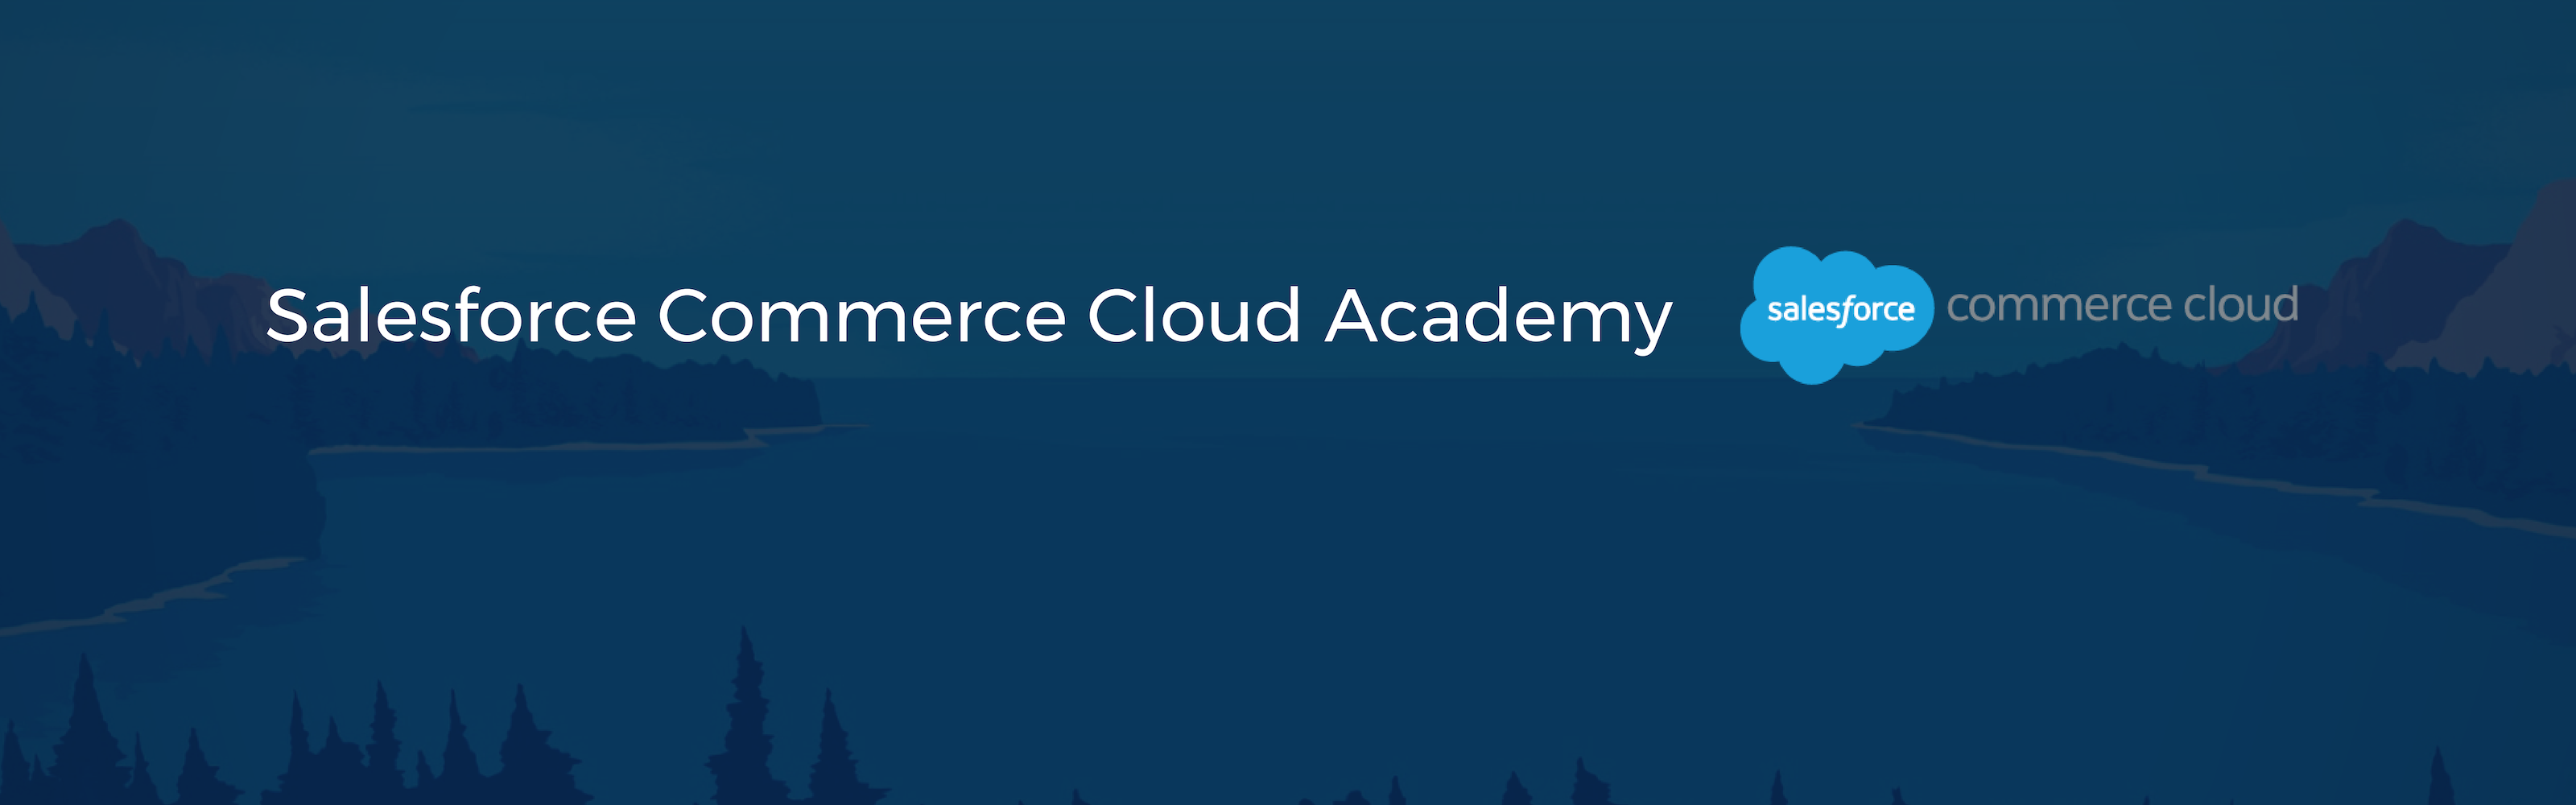 The Salesforce Commerce Cloud Academy by VISEO